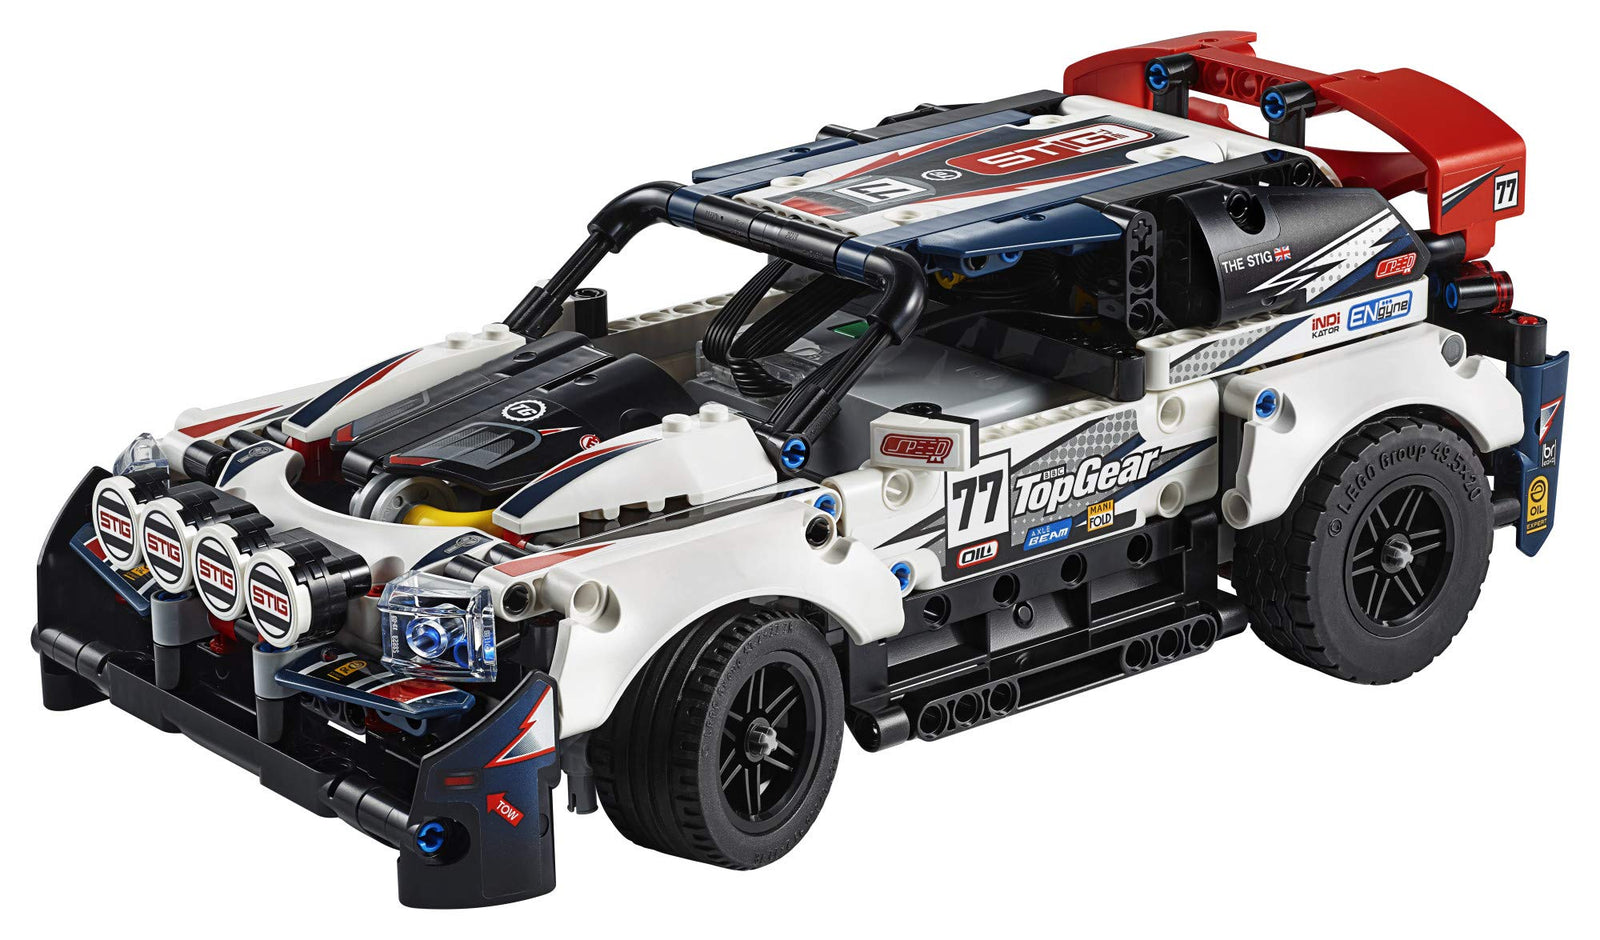 LEGO Technic App-Controlled Top Gear Rally Car 42109 Racing Toy Building Kit (463 Pieces)